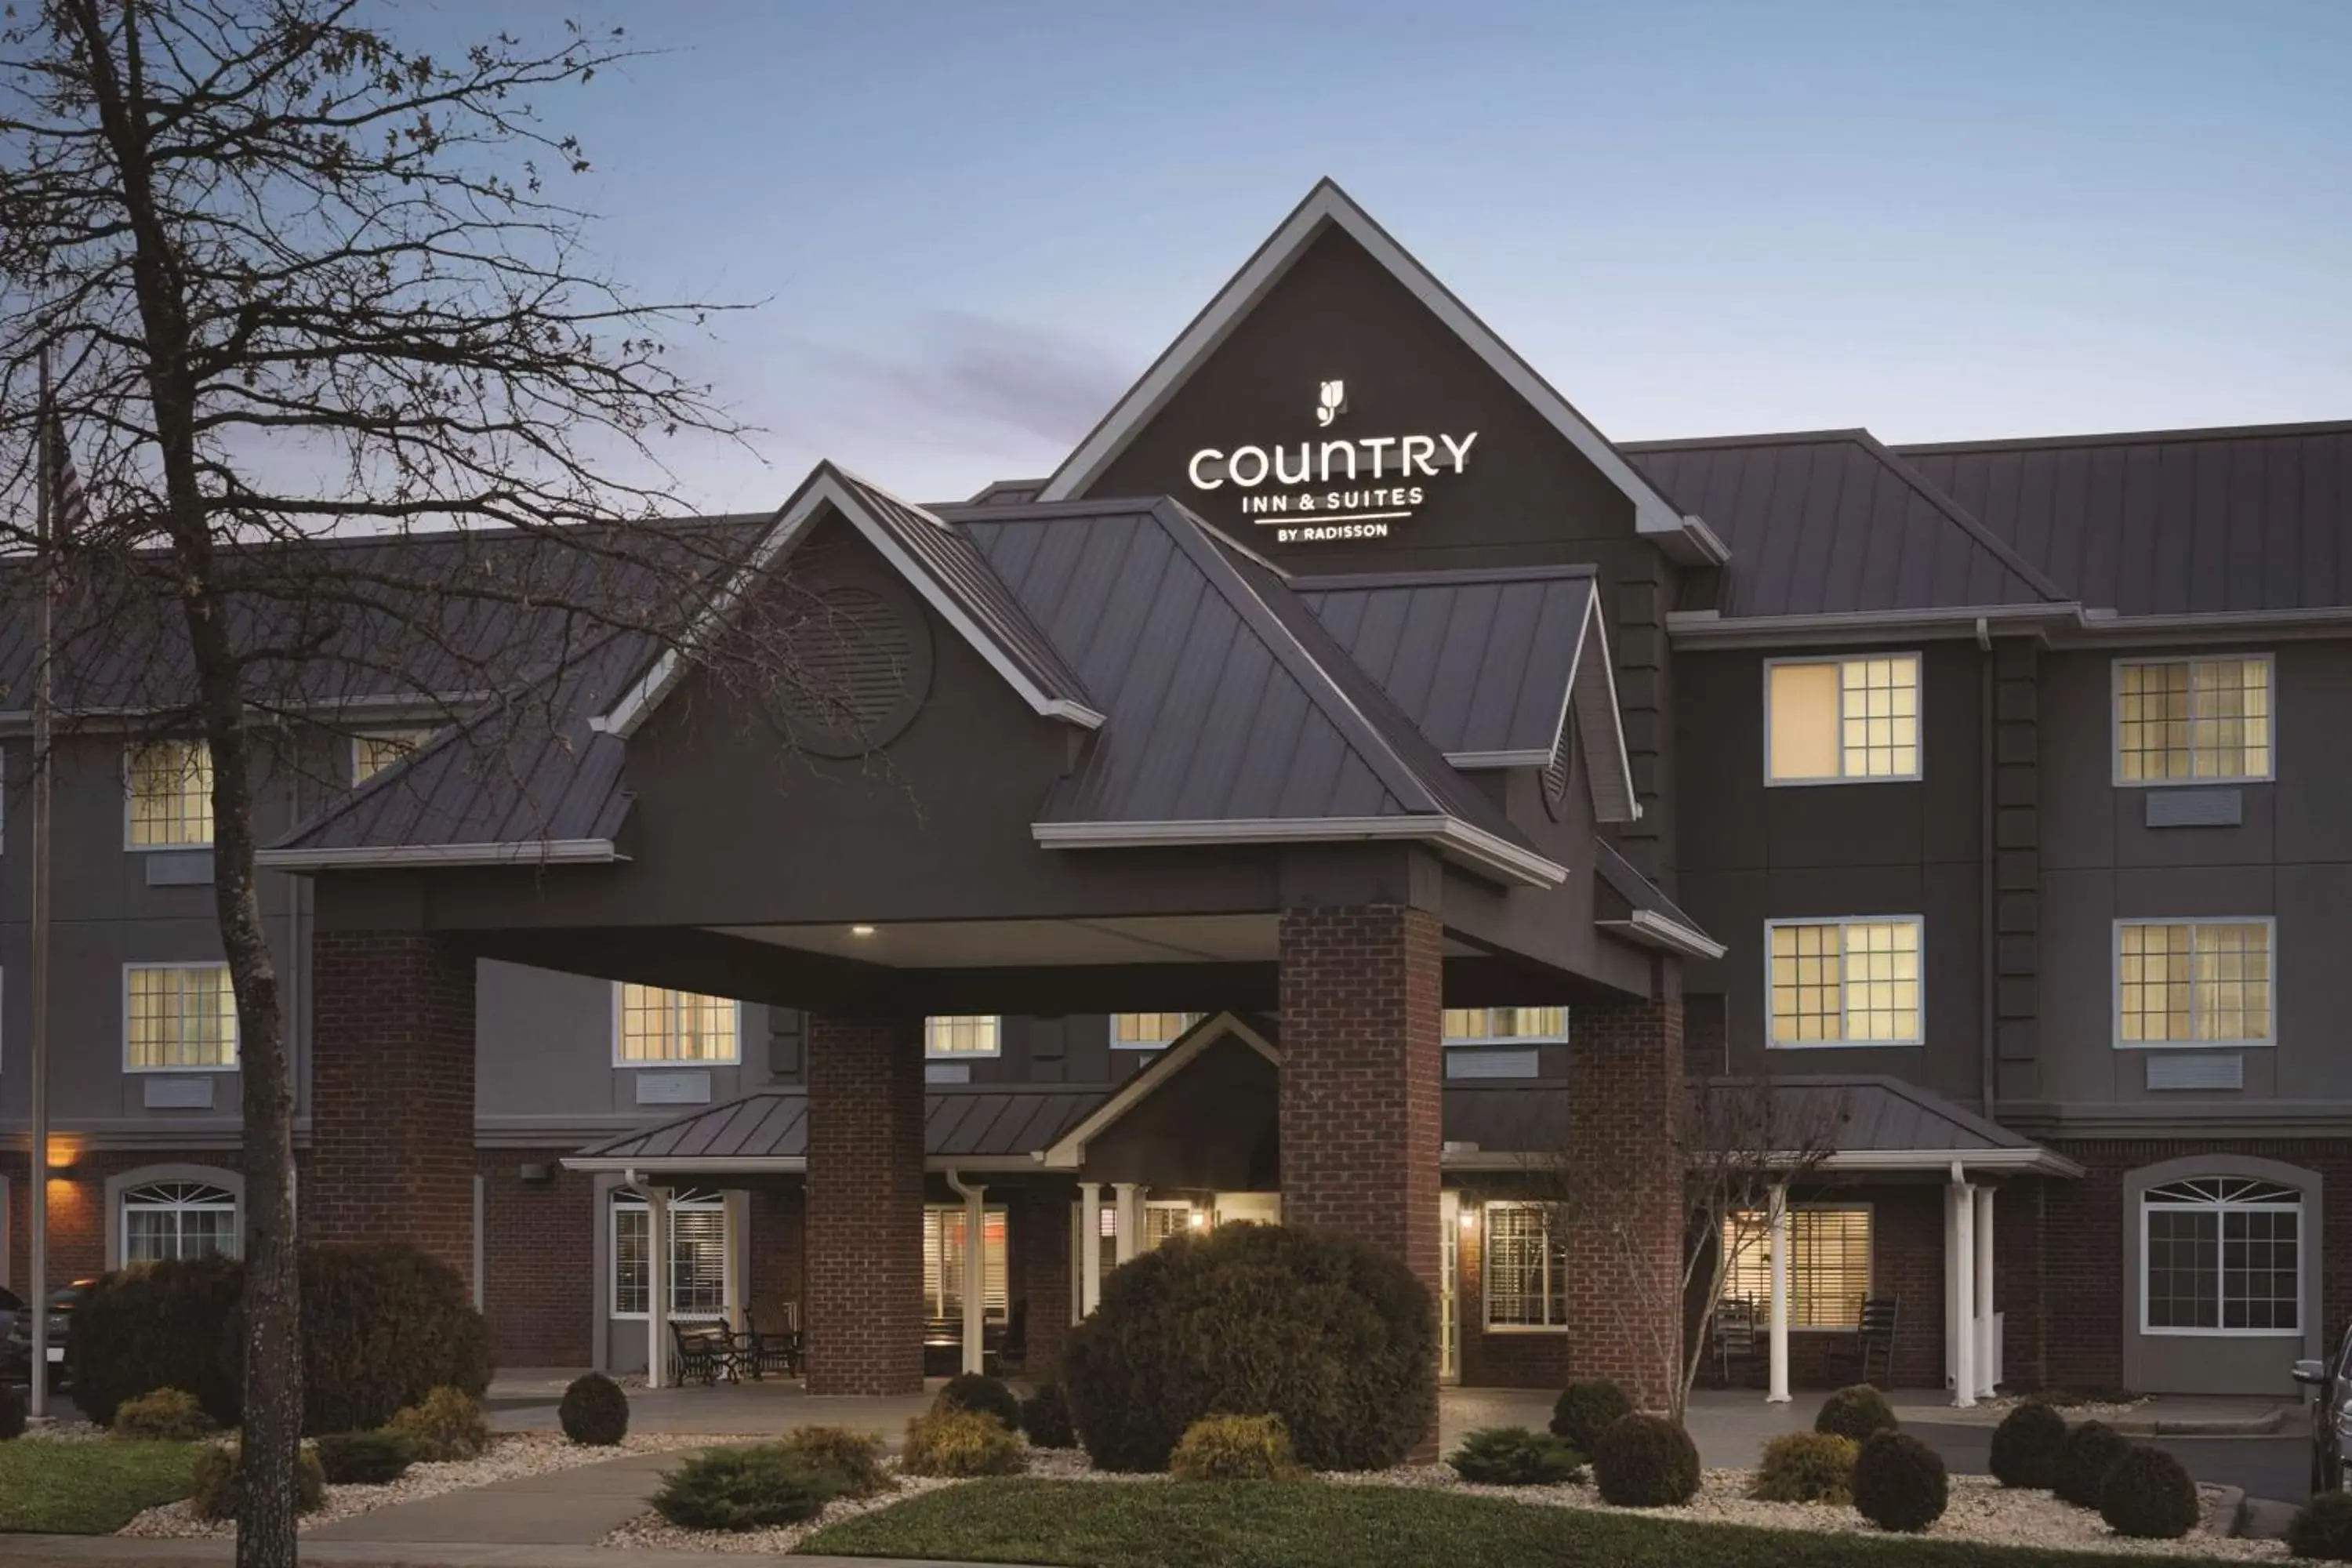 Property building in Country Inn & Suites by Radisson, Madison, AL